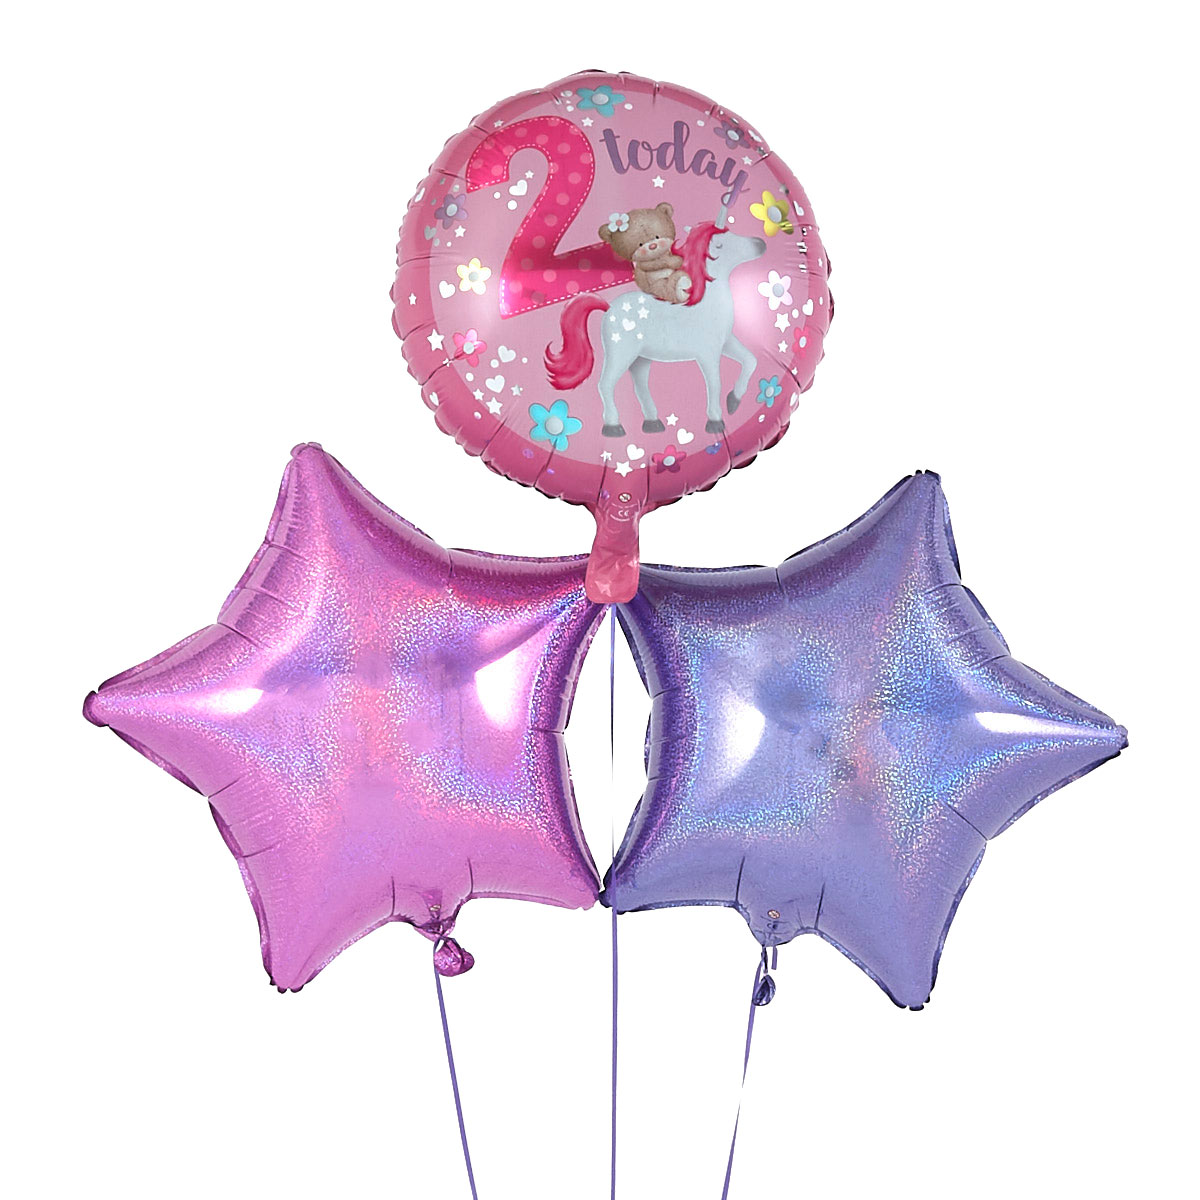 2nd Birthday Hugs Unicorn Pink Balloon Bouquet - DELIVERED INFLATED!